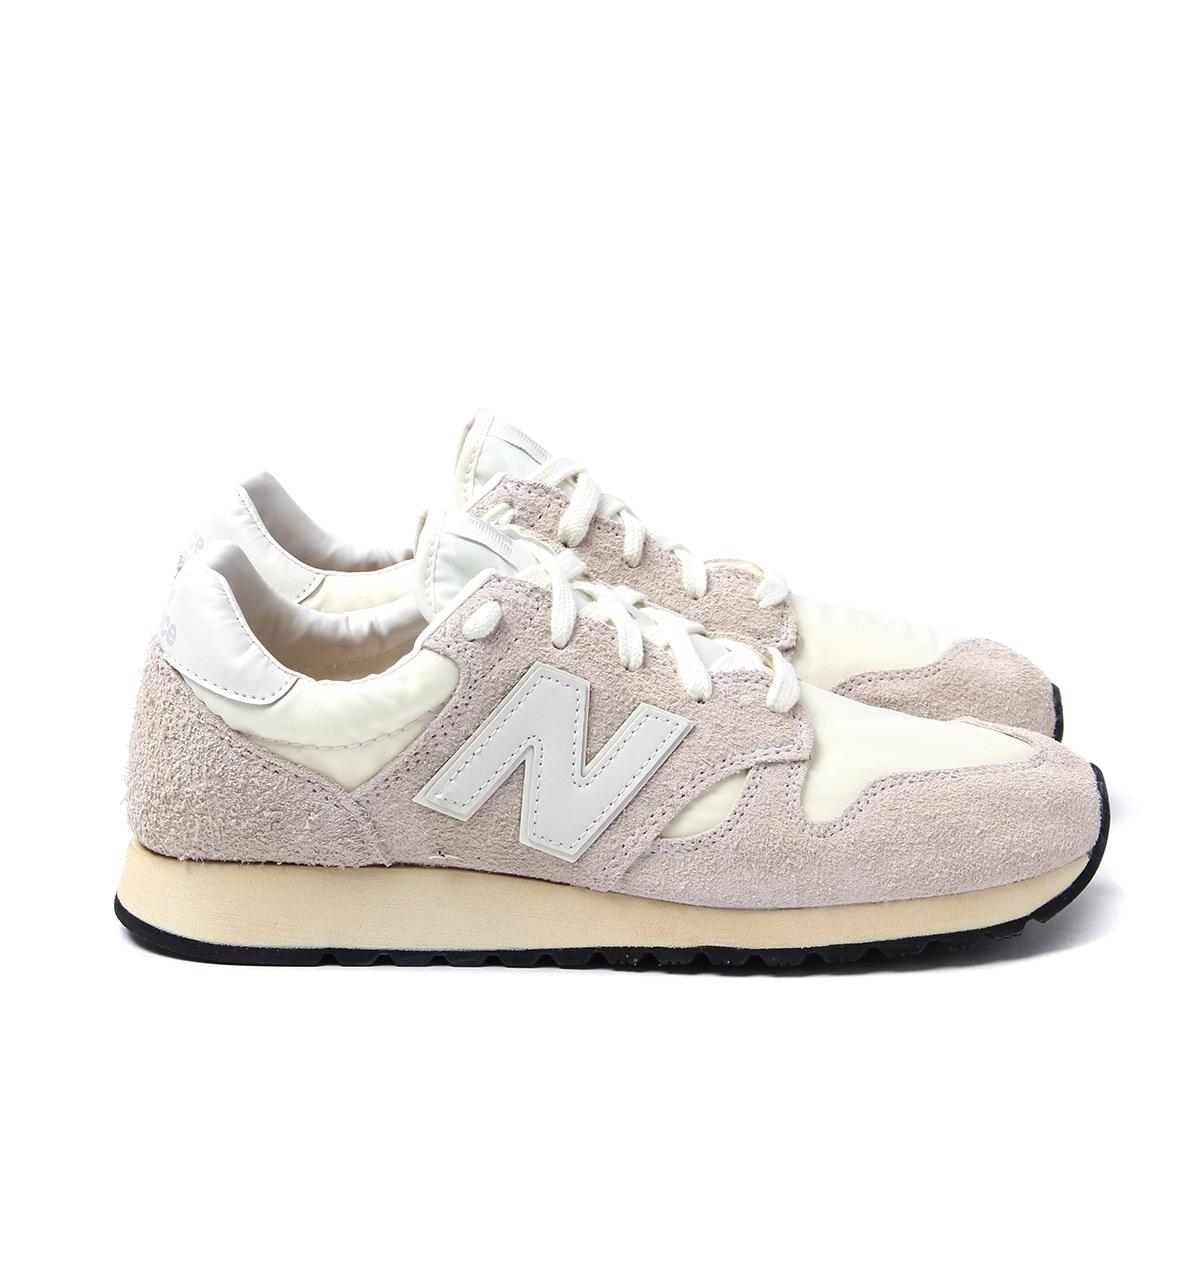 New Balance 520 Beige Suede Trainers in 